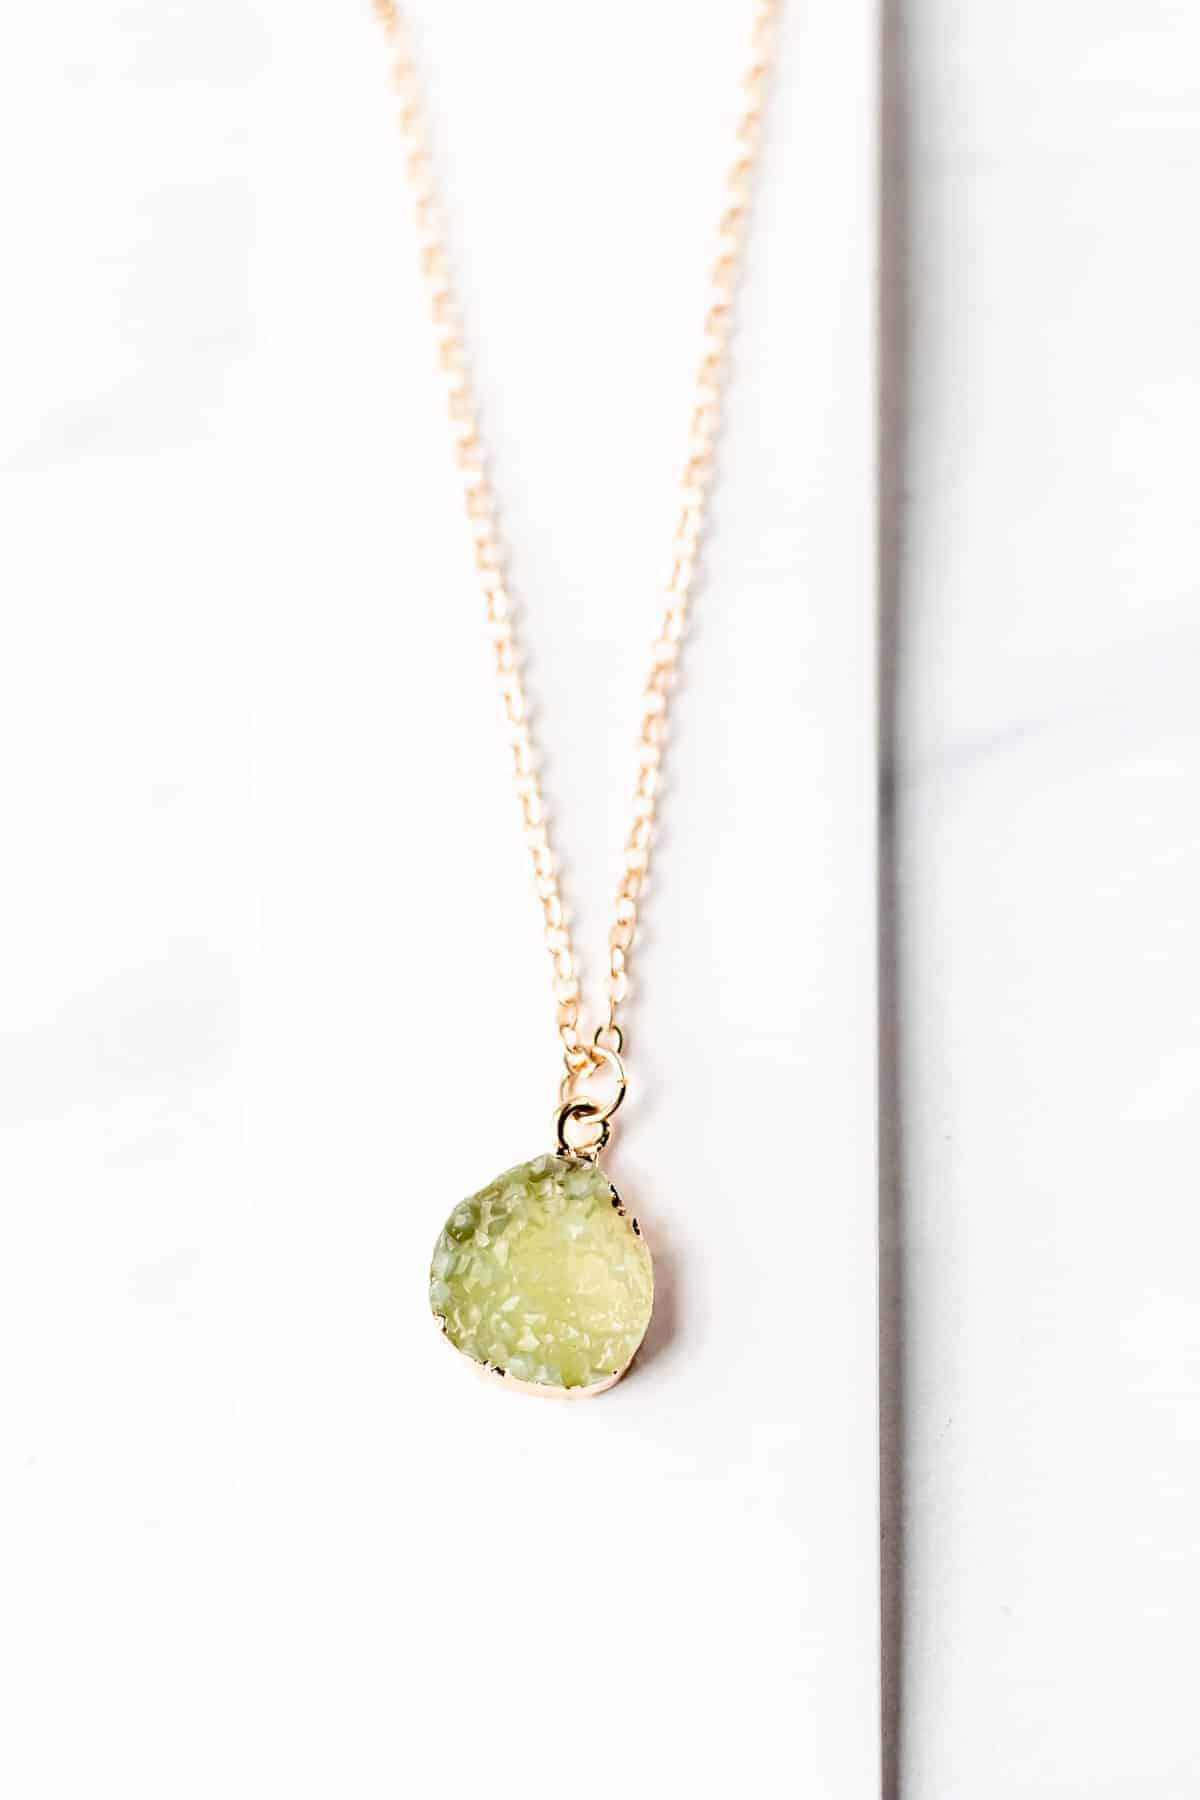 aux Gem Charm Necklace in green.